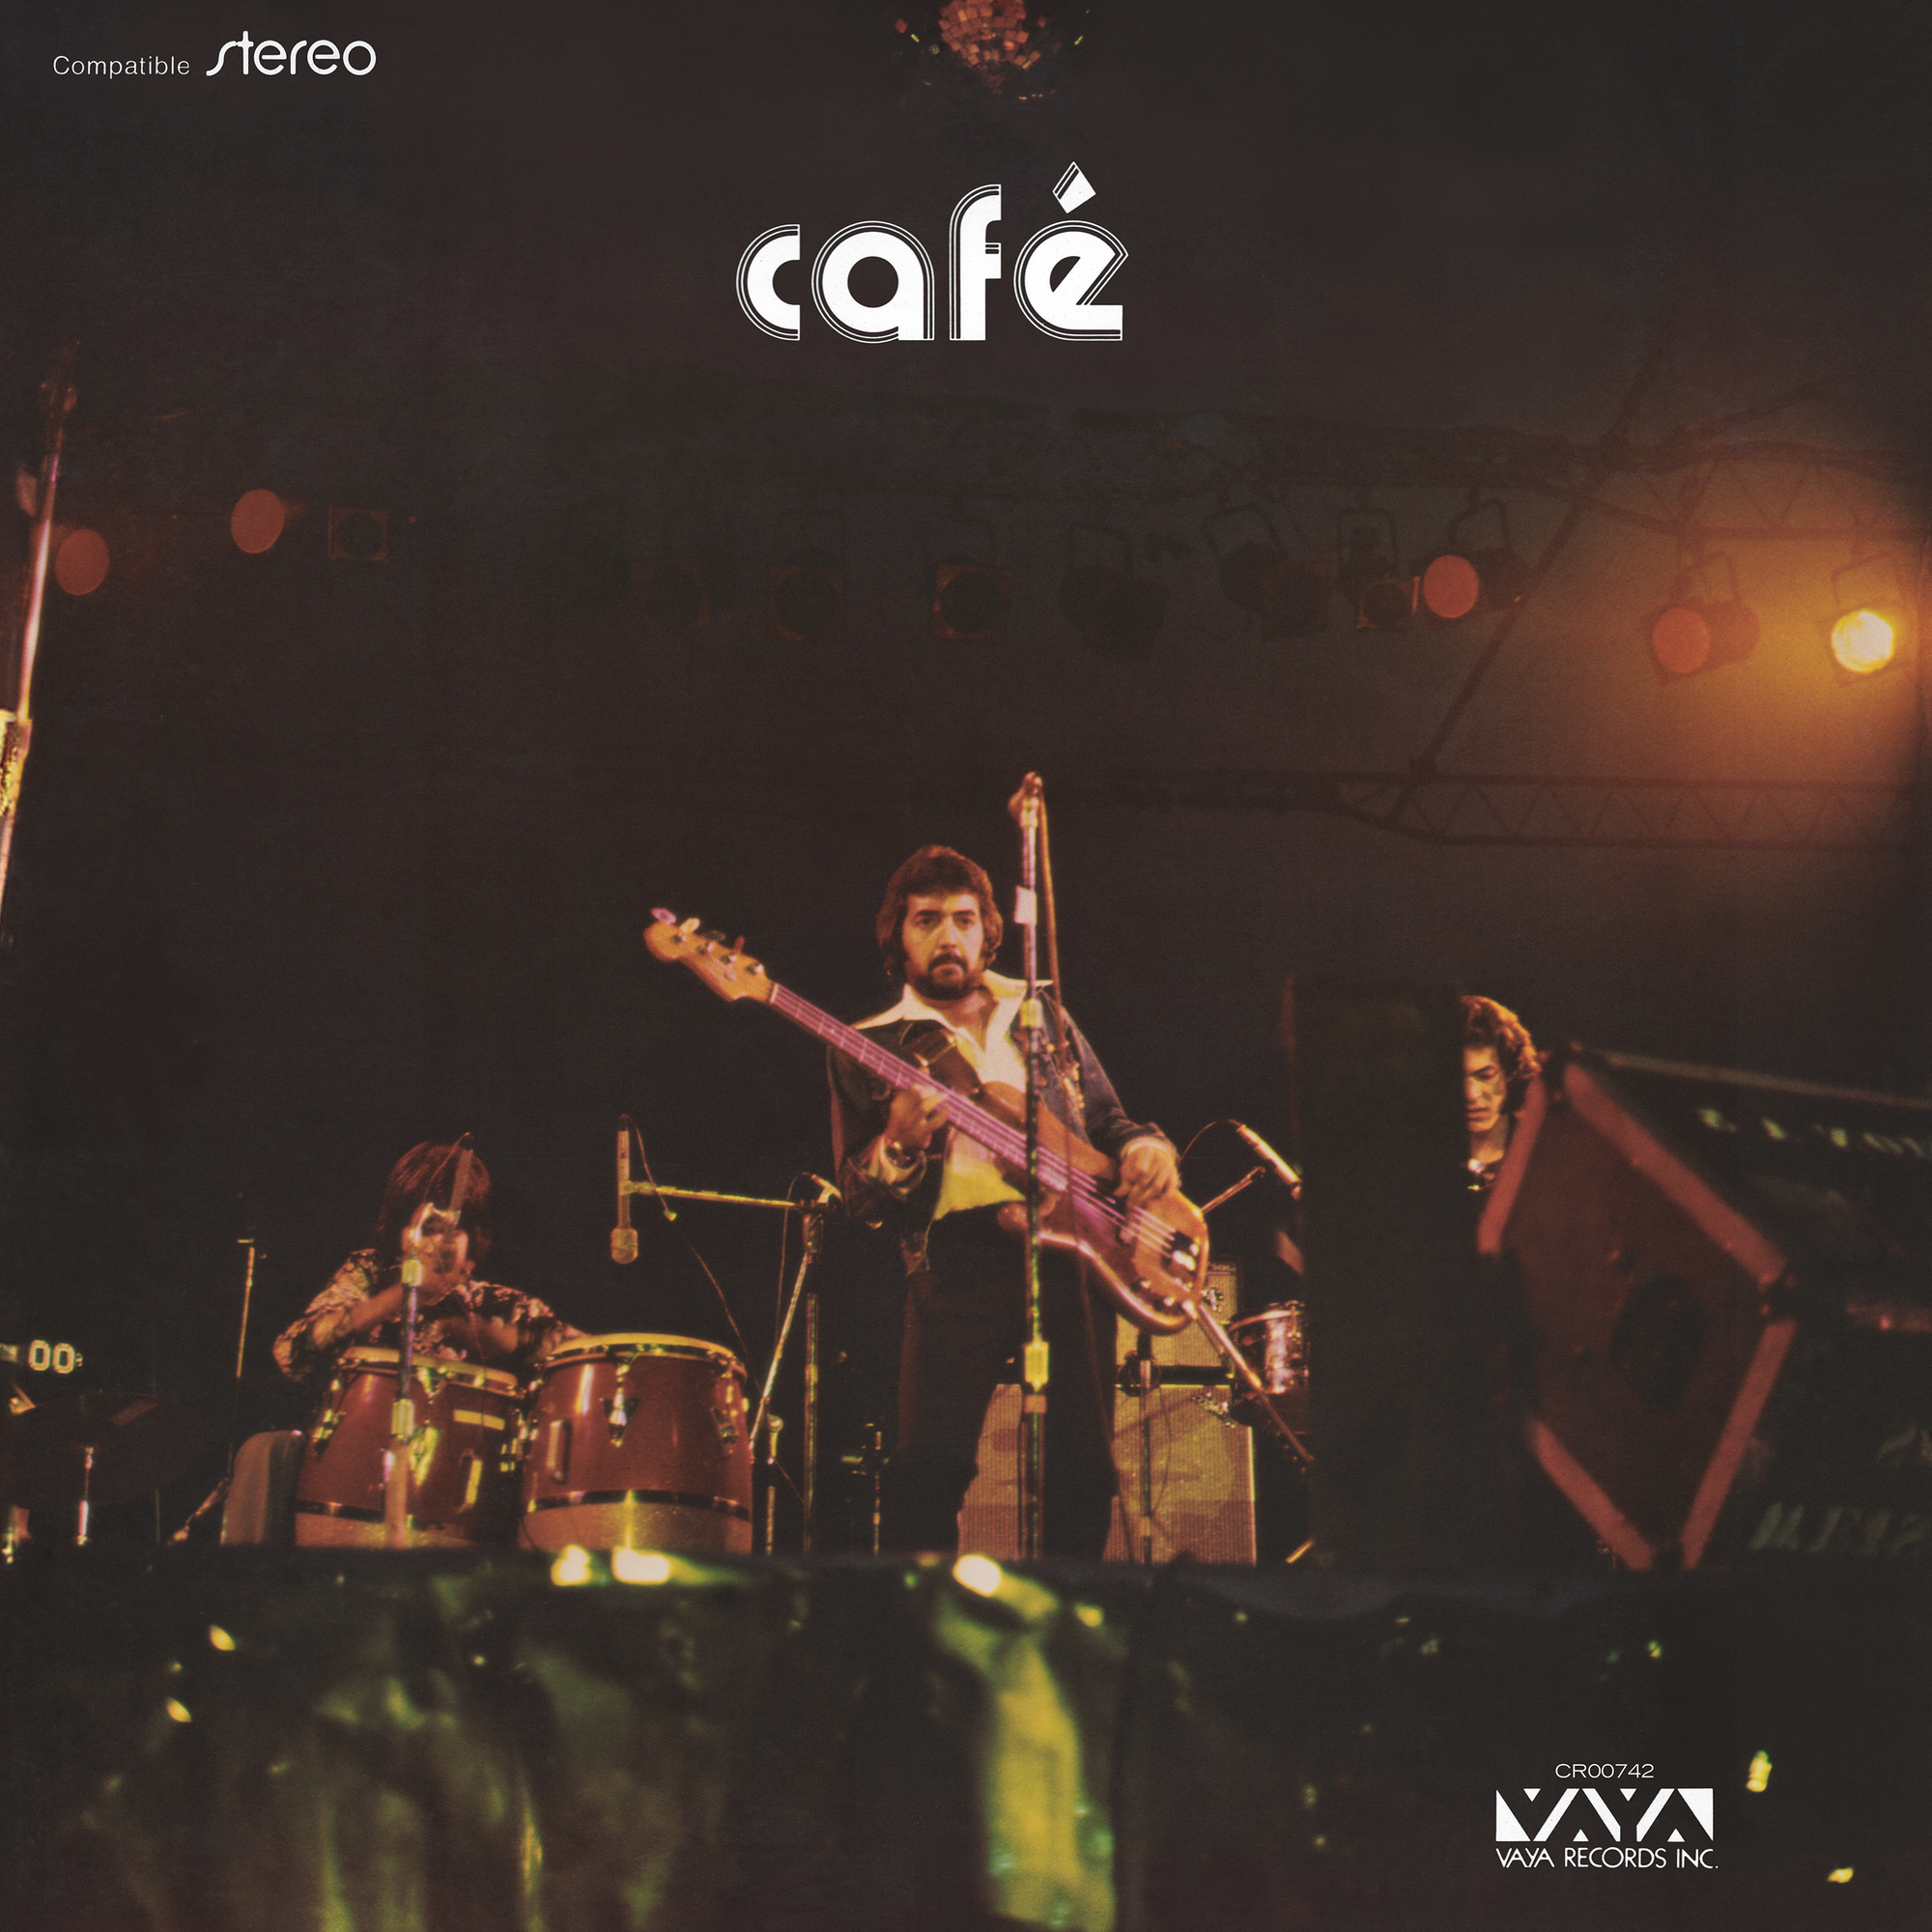 UNVEILING THE LATEST ADDITION IN THE FANIA RECORDS 60TH ANNIVERSARY SERIES: RARE LATIN ROCK, FUNK AND SOUL GEM CAFÉ